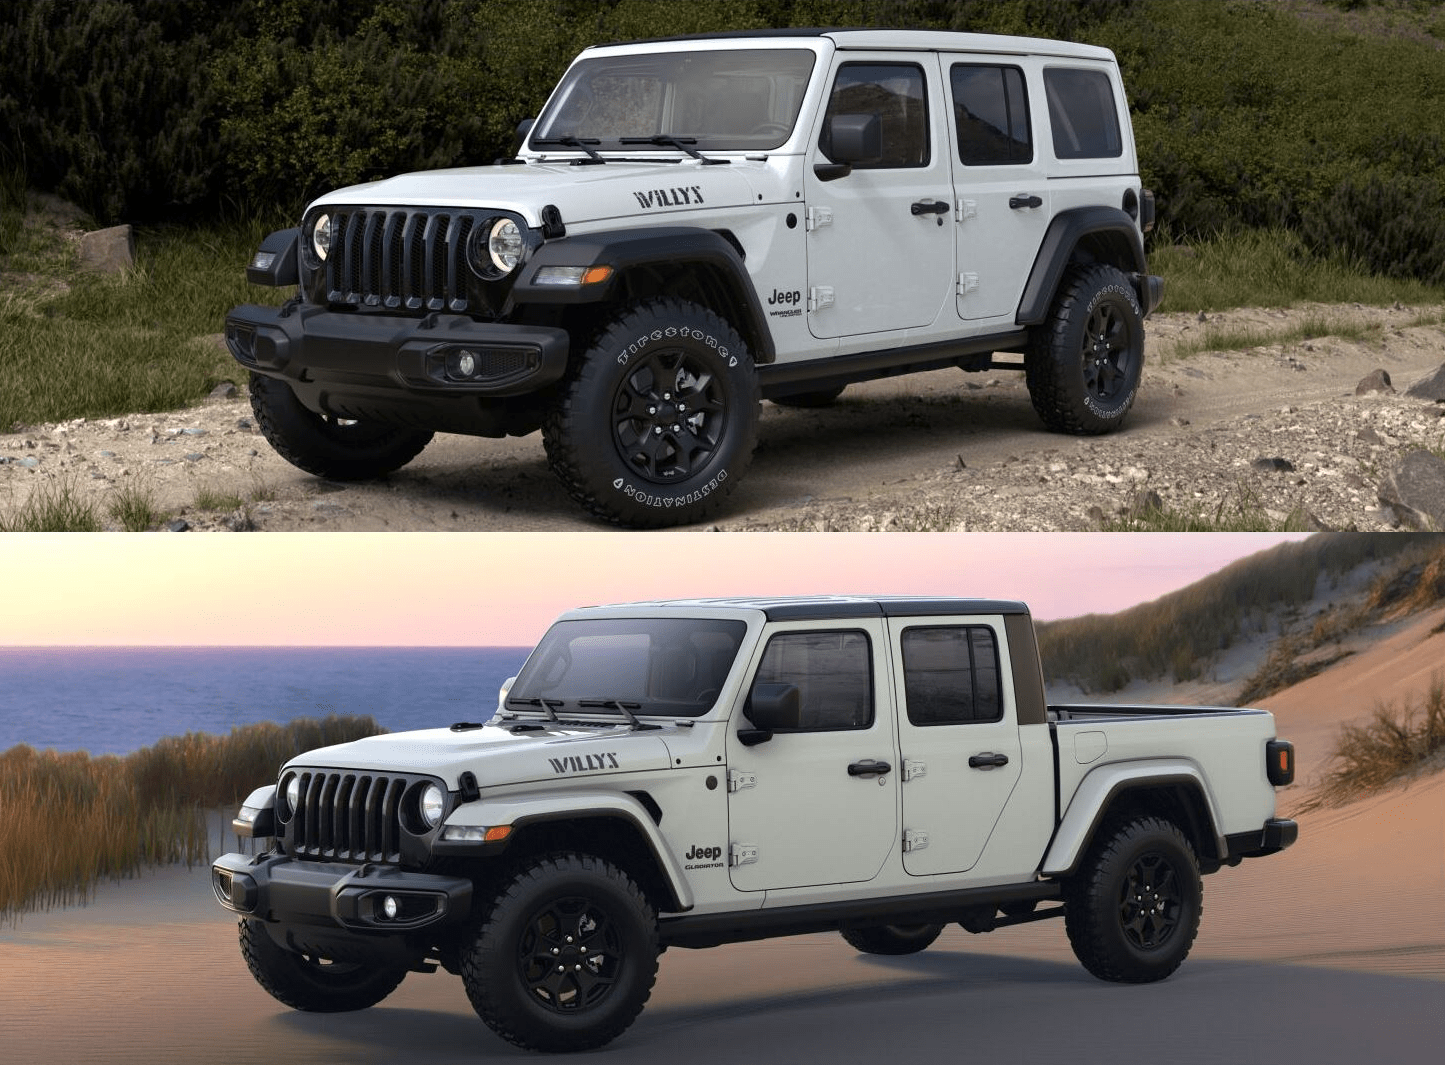 Is-the-Gladiator-Like-the-Wrangler Is The Jeep Gladiator a Useful Truck?